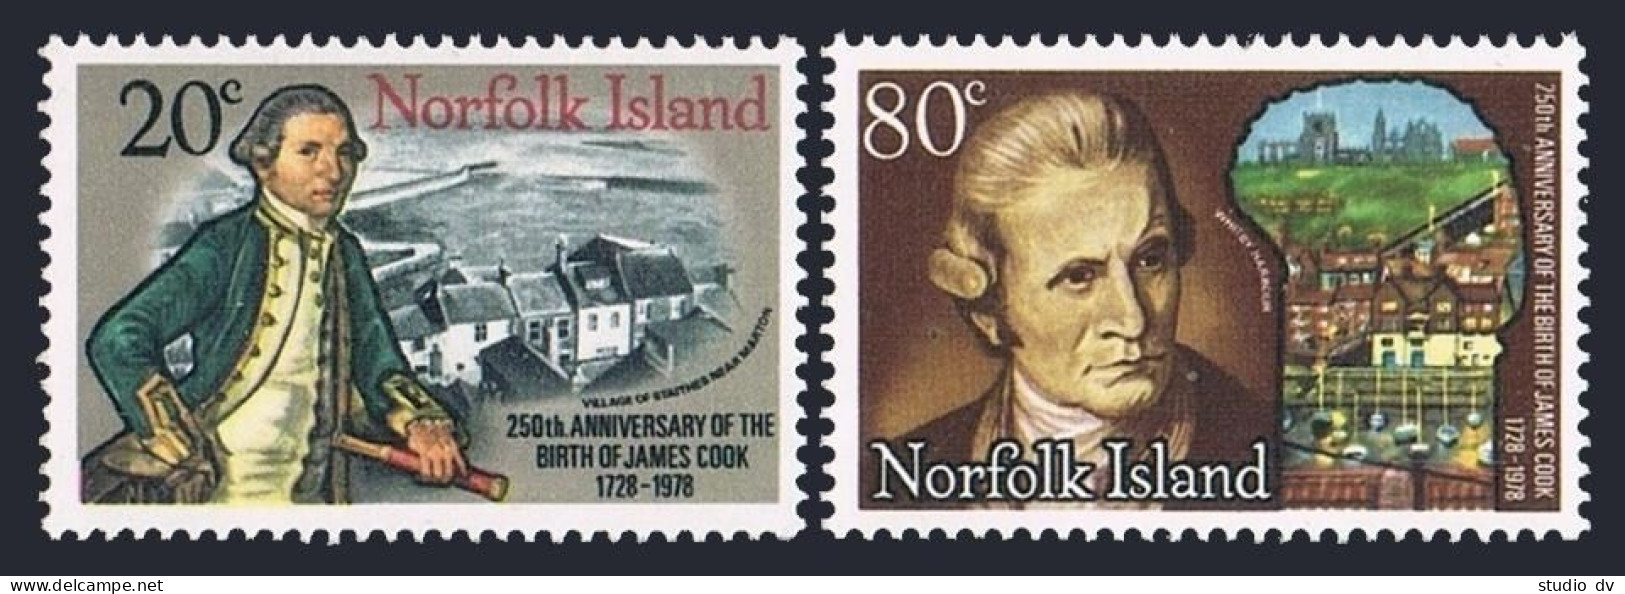 Norfolk 240-241,MNH.Michel 223-224. Capt Cook,1978.Staithes,Whitby Harbor. - Norfolk Island